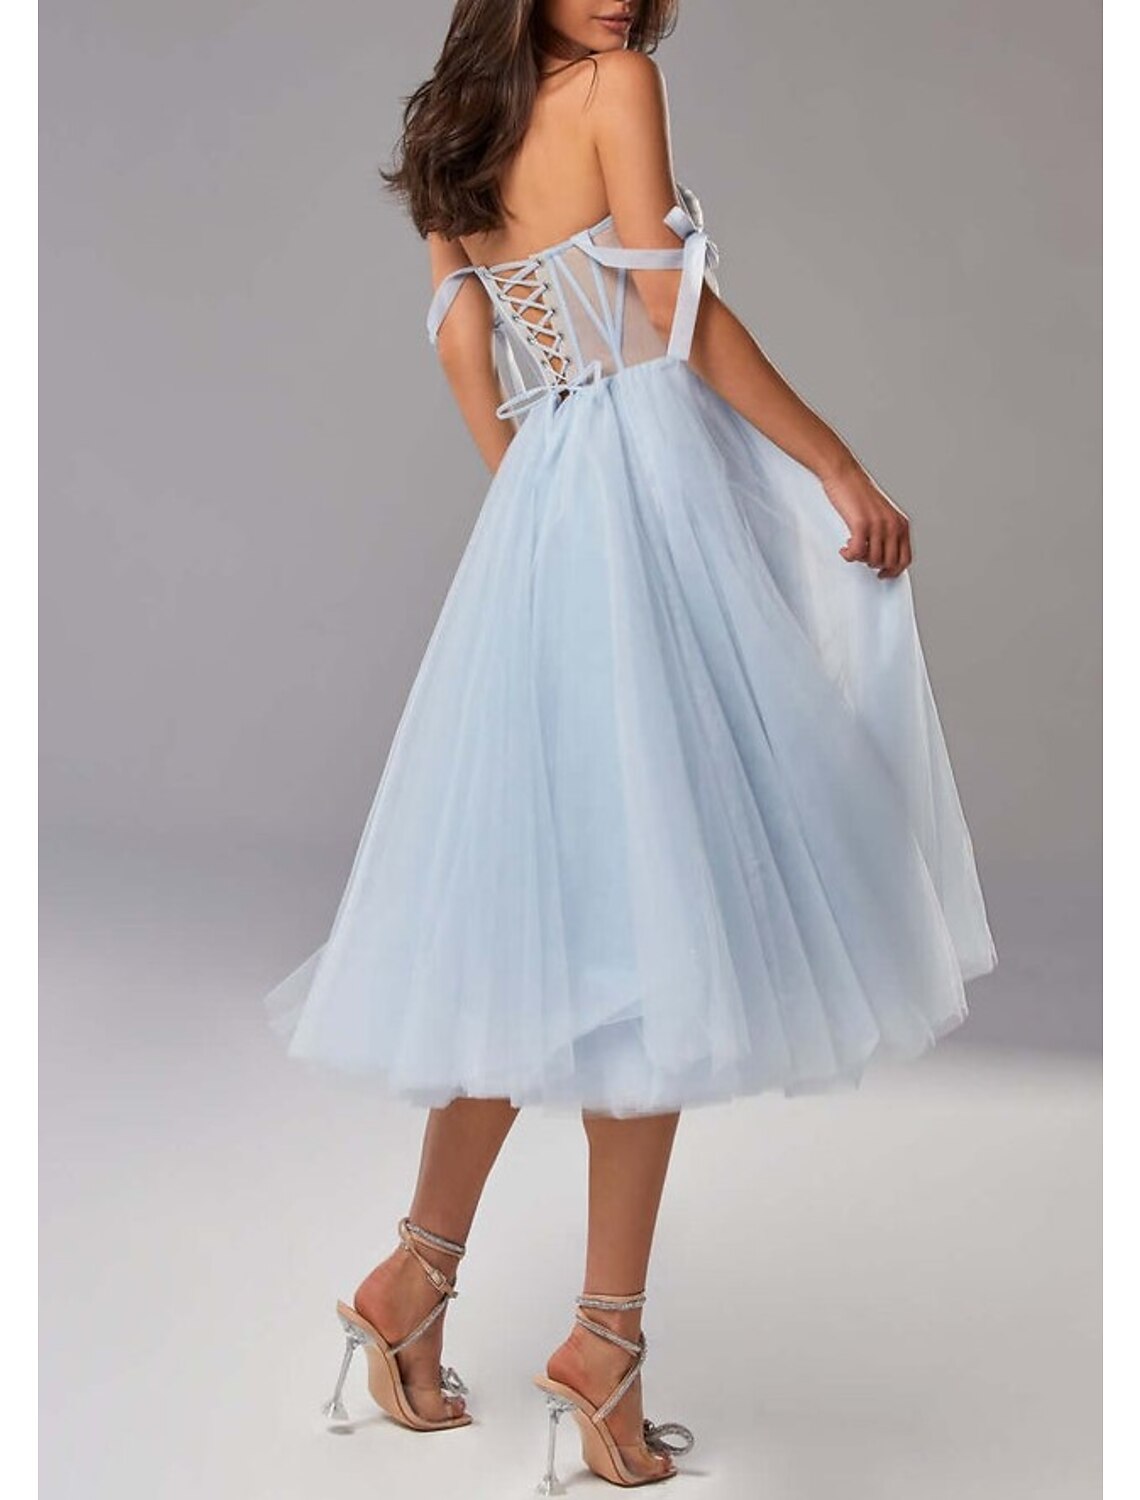 Two Piece A-Line Prom Dresses Elegant Dress Wedding Guest Tea Length Half Sleeve Sweetheart Tulle with Pleats Pure Color